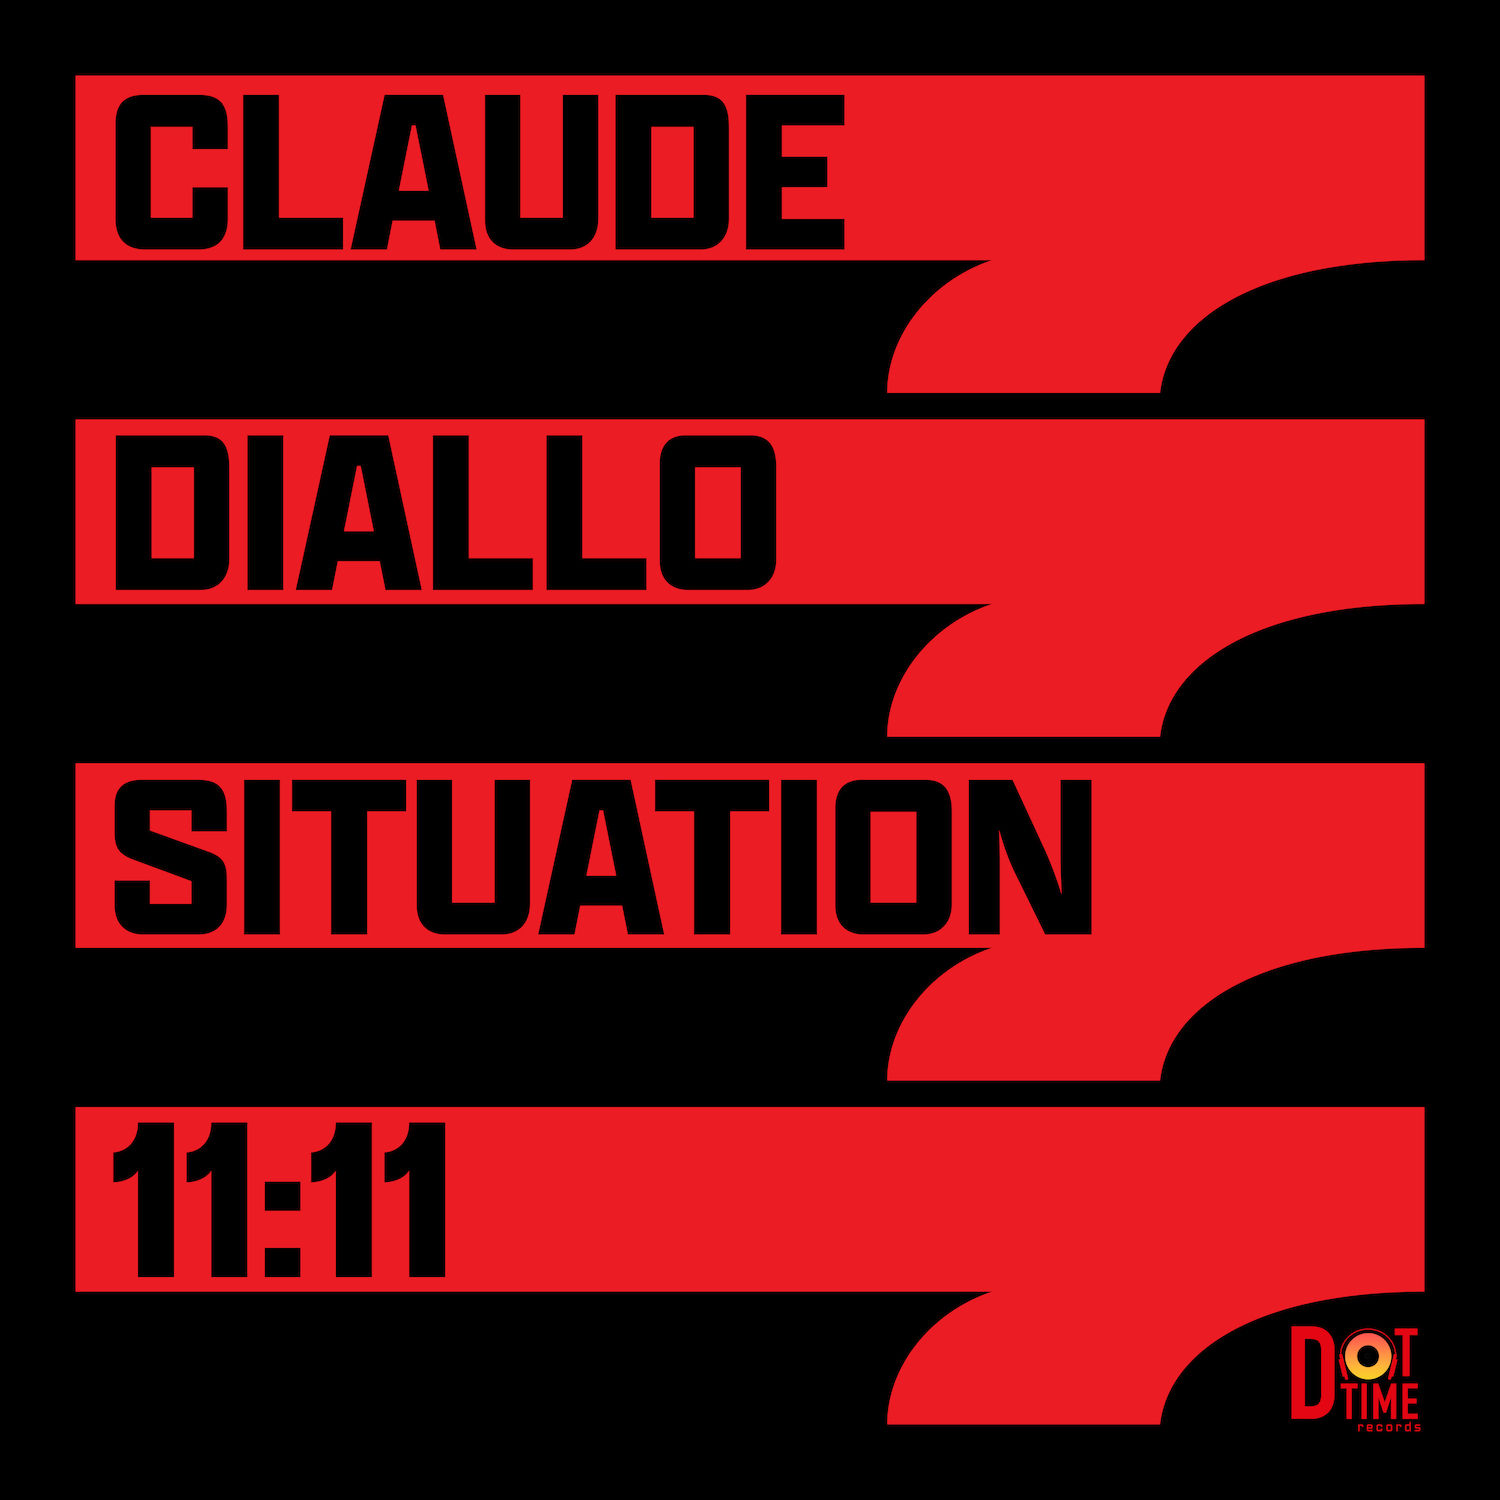 Claude Diallo Situation - 11 11 1500x1500 Cover